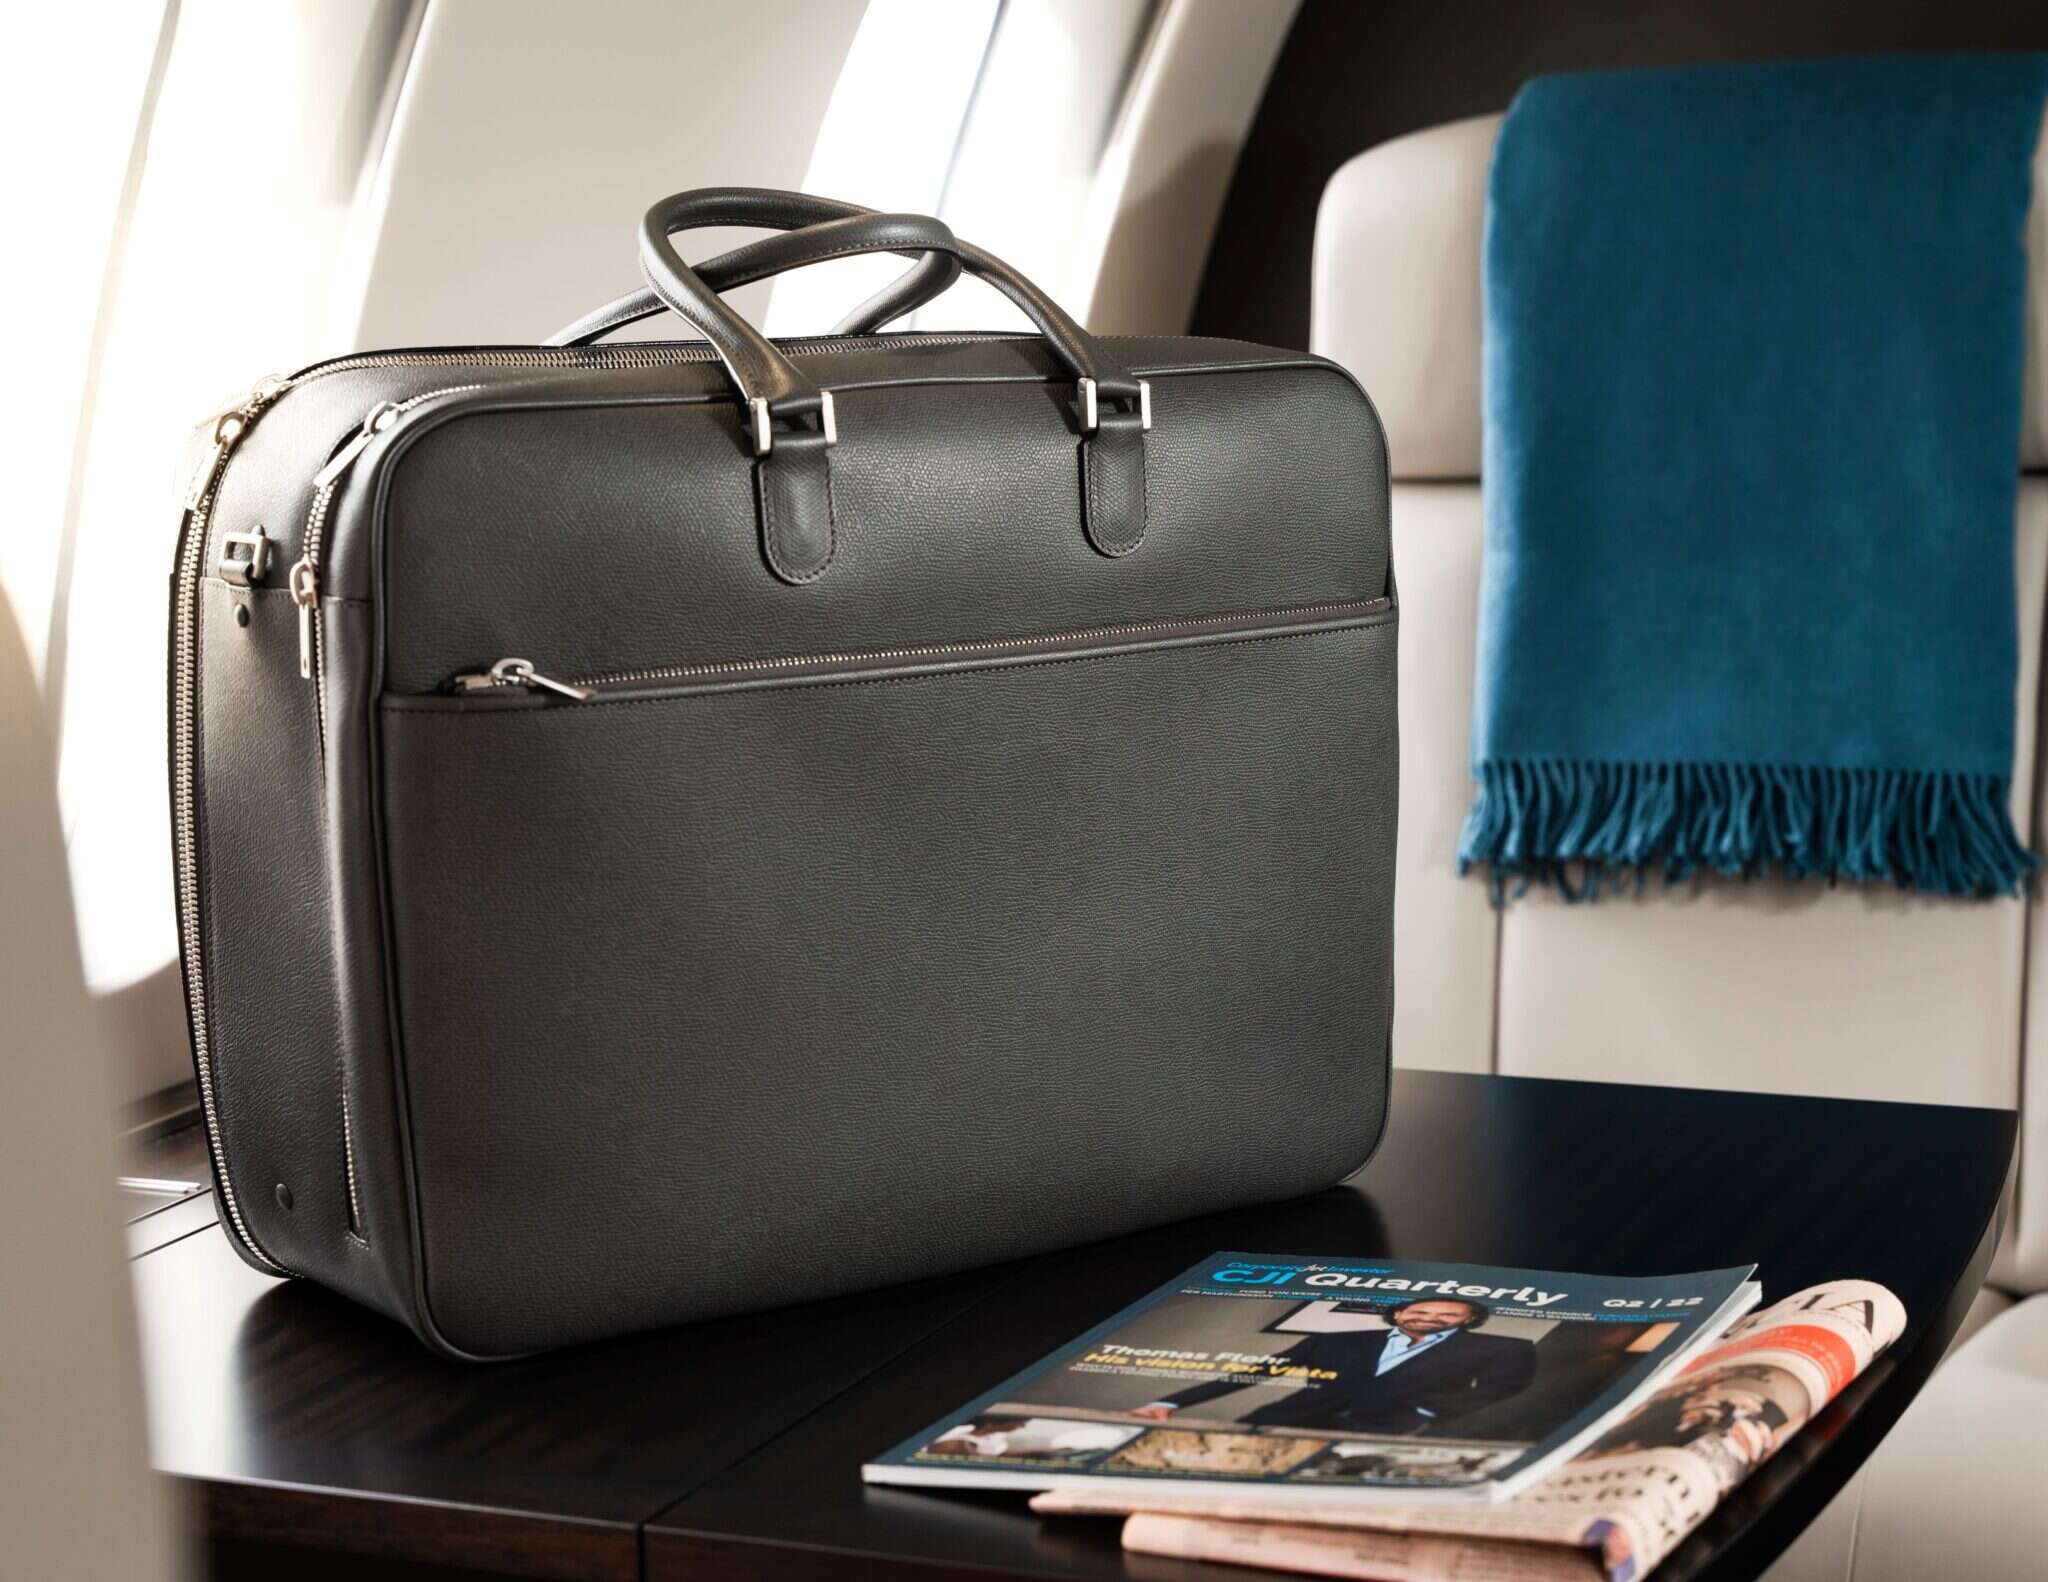 VistaJet and Valextra Collab for Exclusive Luggage Line